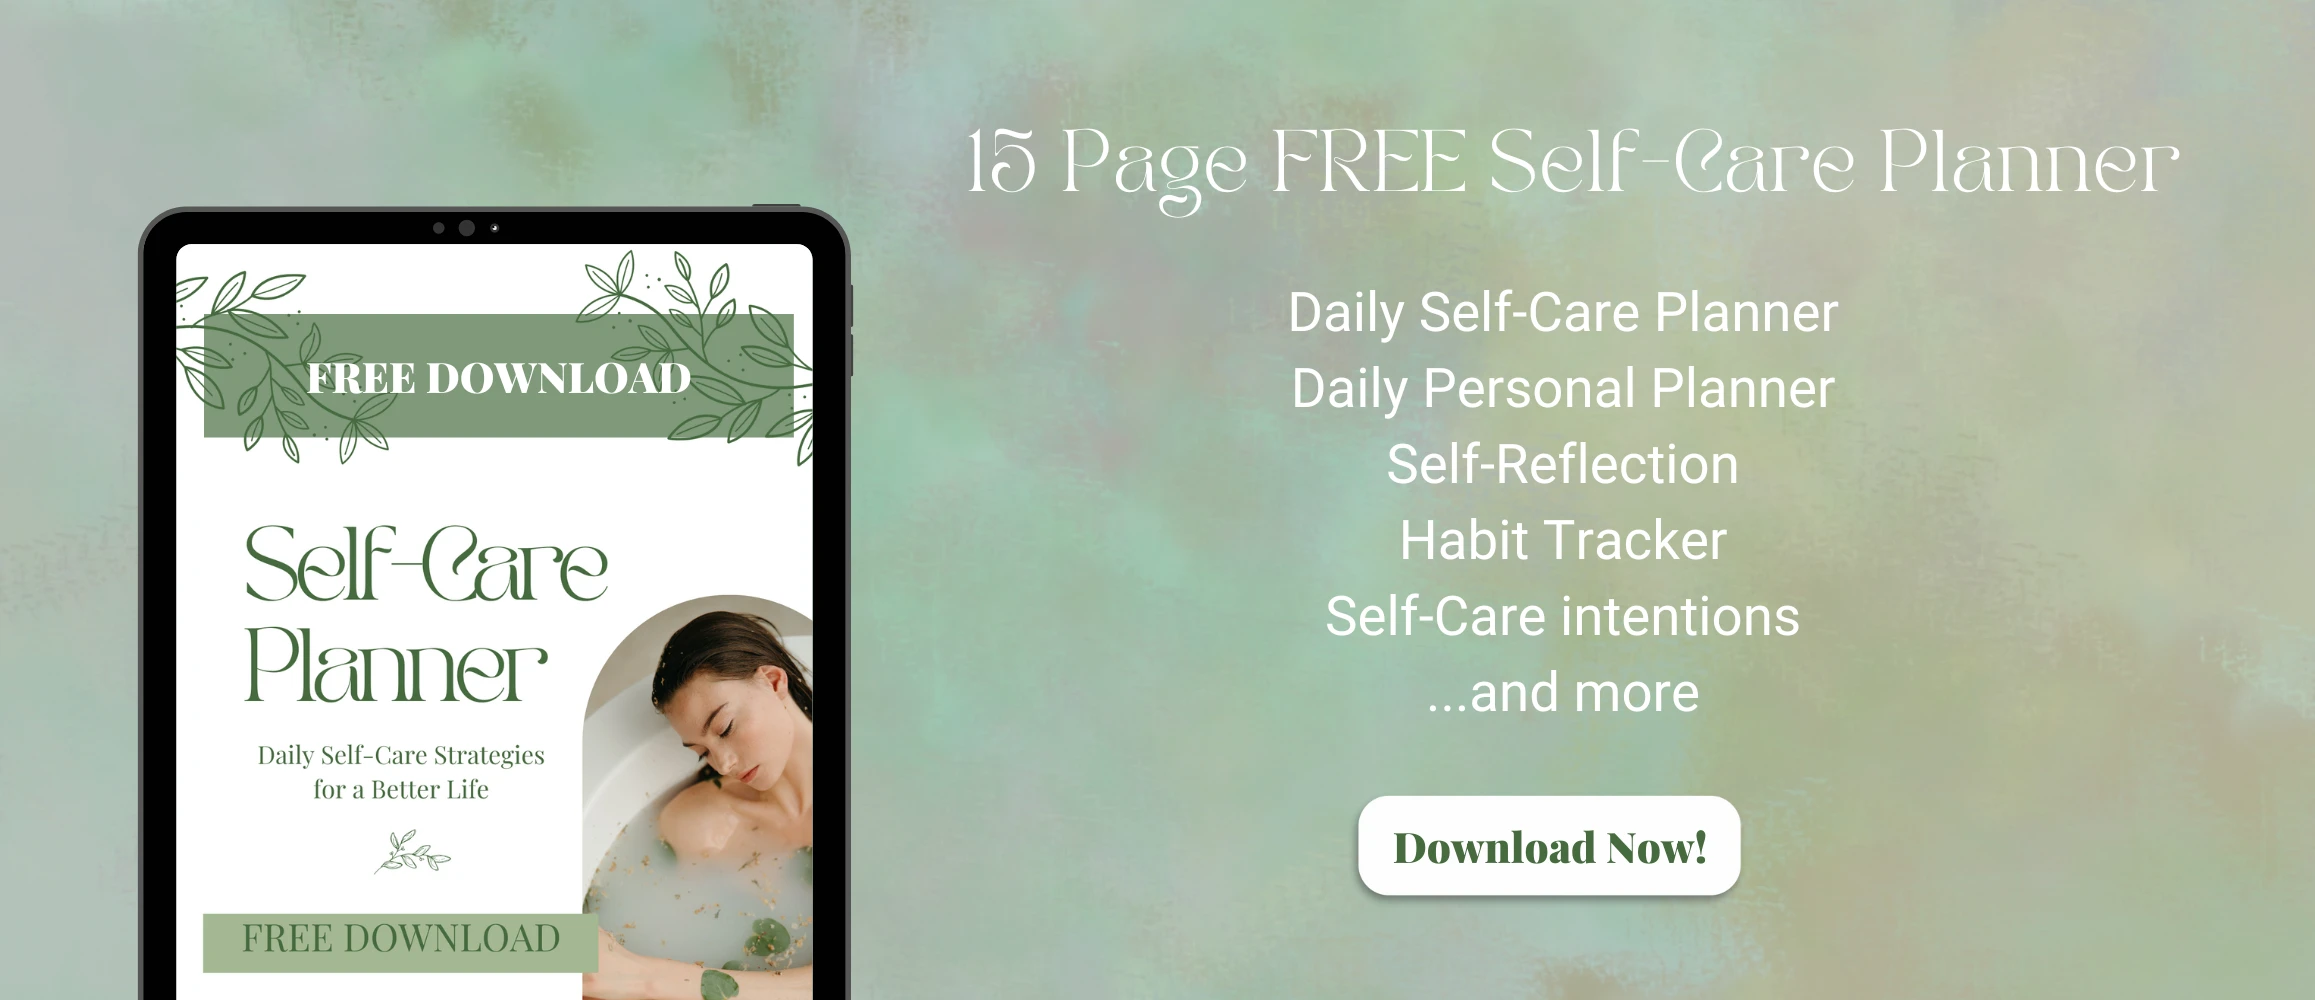 90023151000173-website-banner-for-free-self-care-planner-17067179379049.png